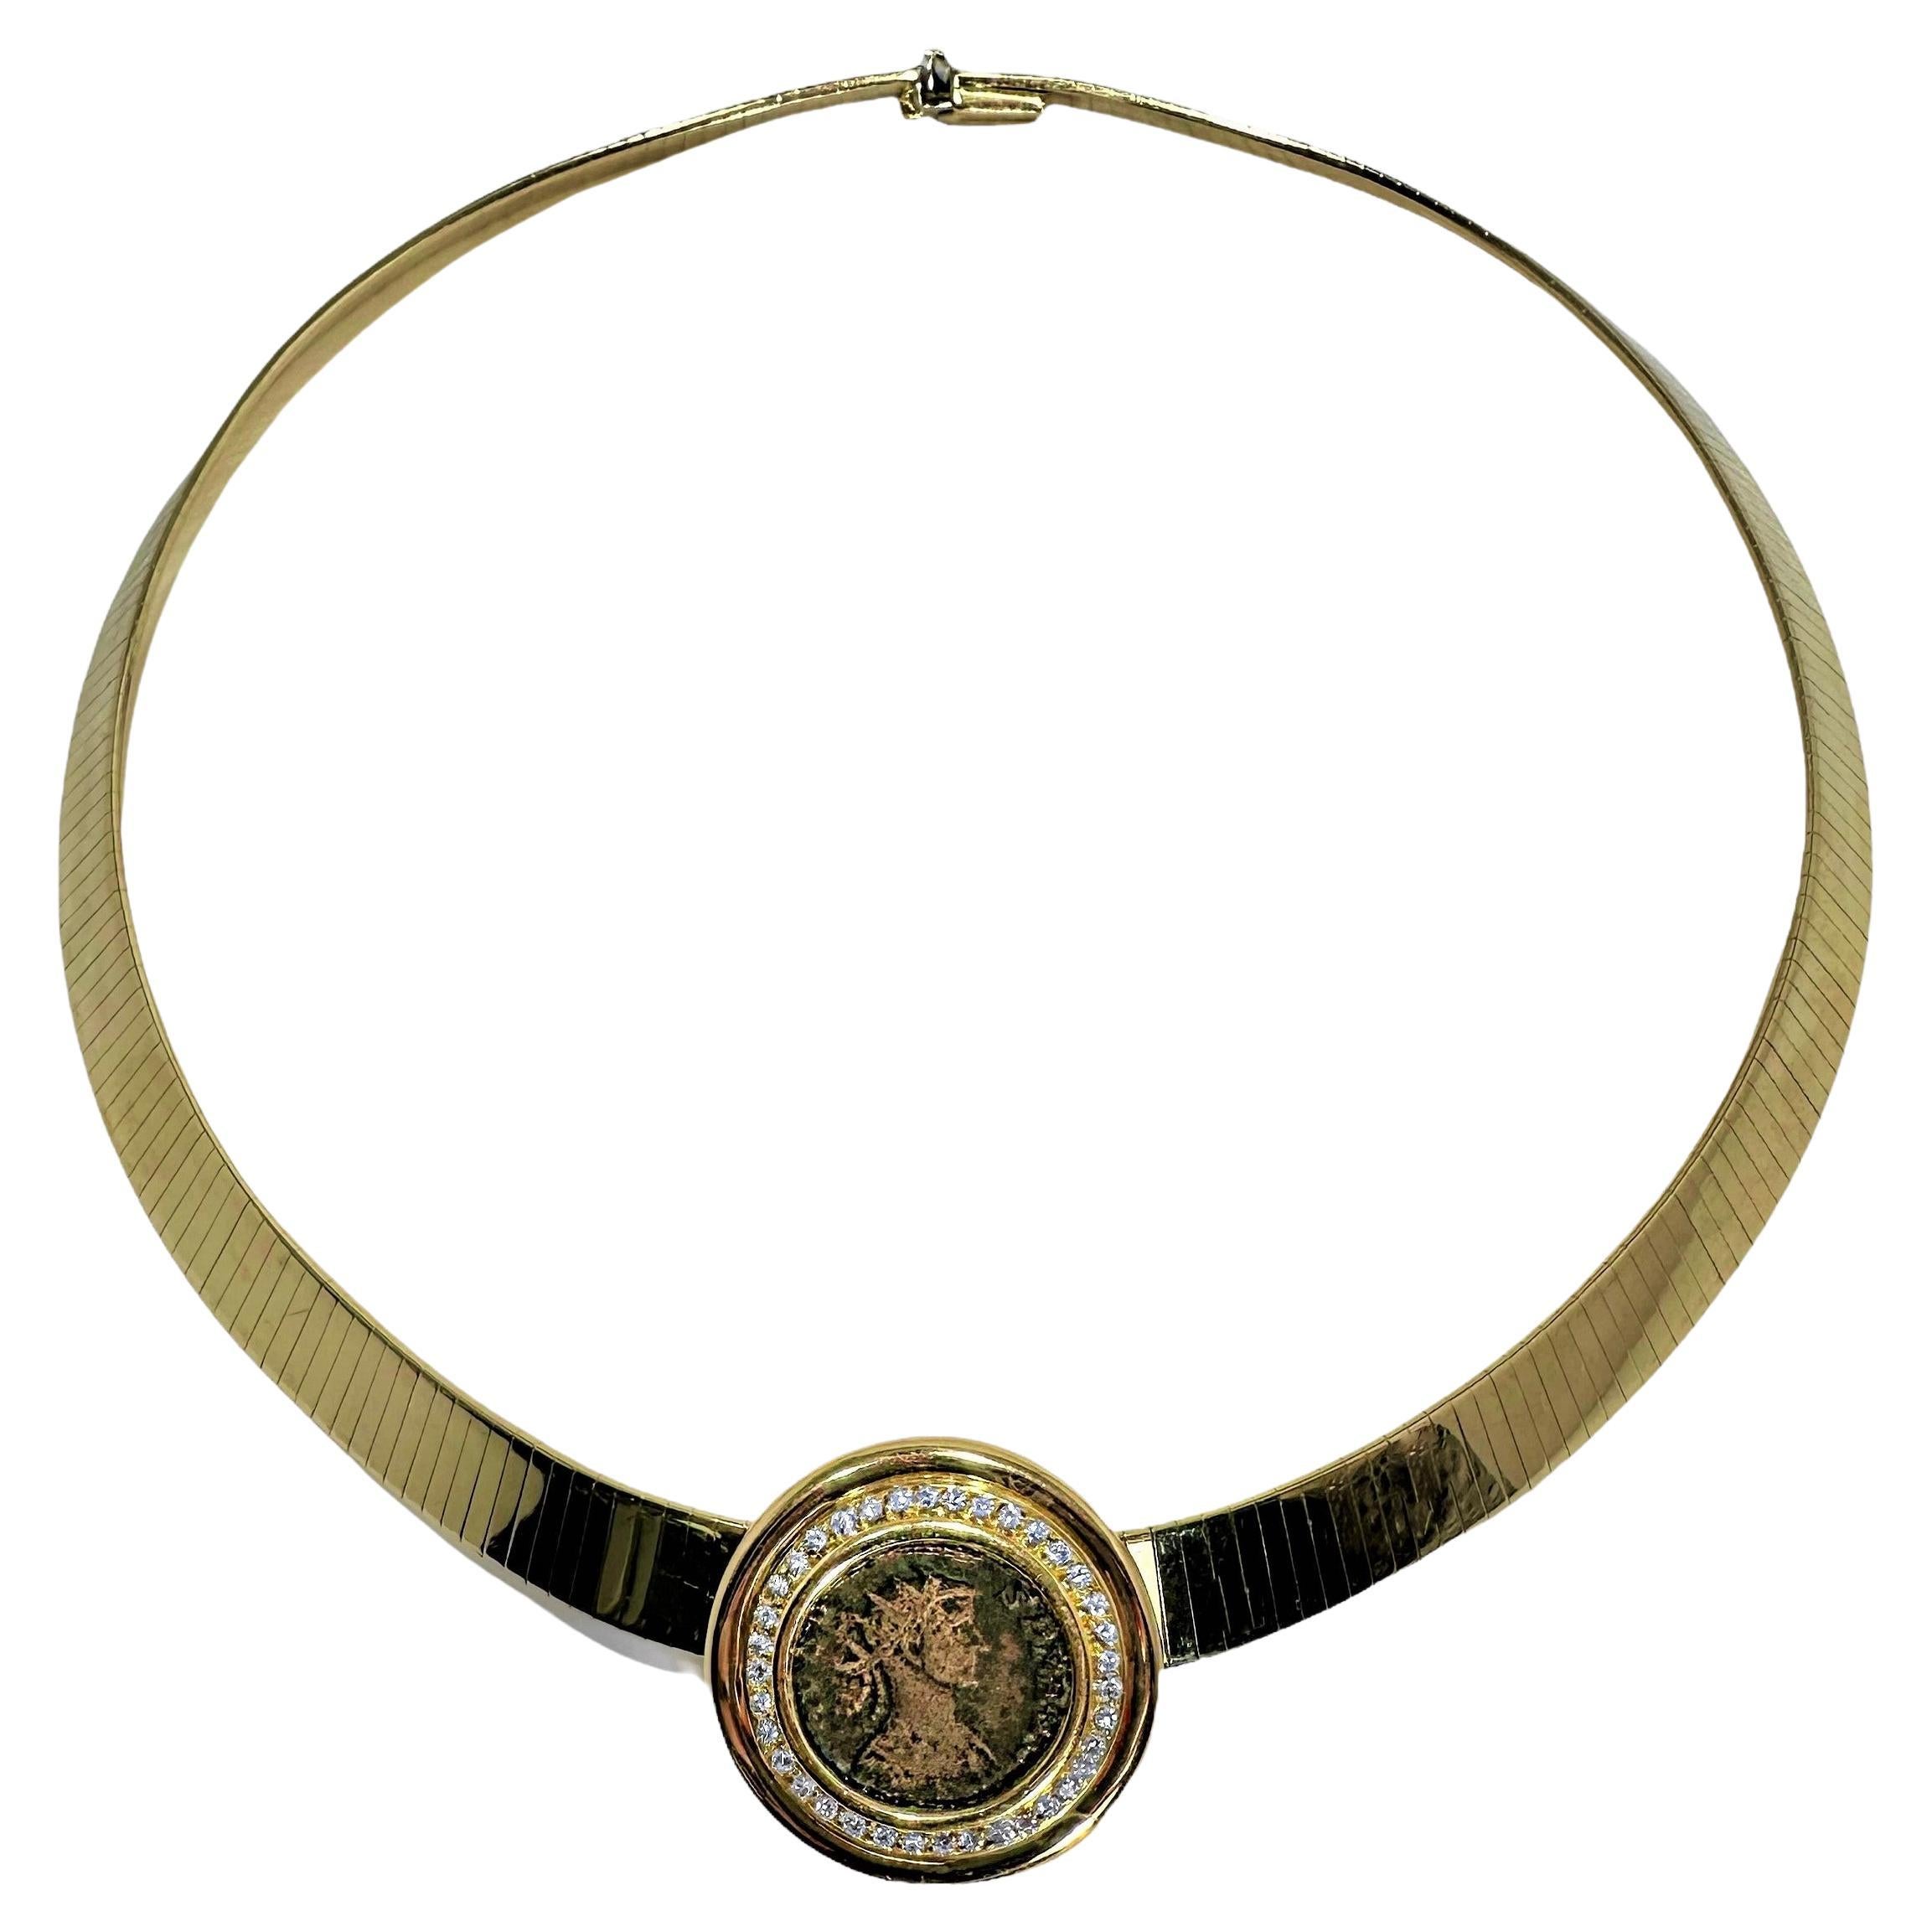 This tastefully designed Omega choker length necklace has, at it's center, a unique round disc pendant signed Tallarico, with an ancient bronze Roman coin surrounded by a single line of brilliant cut diamonds. The 5/16 inch wide Italian Omega